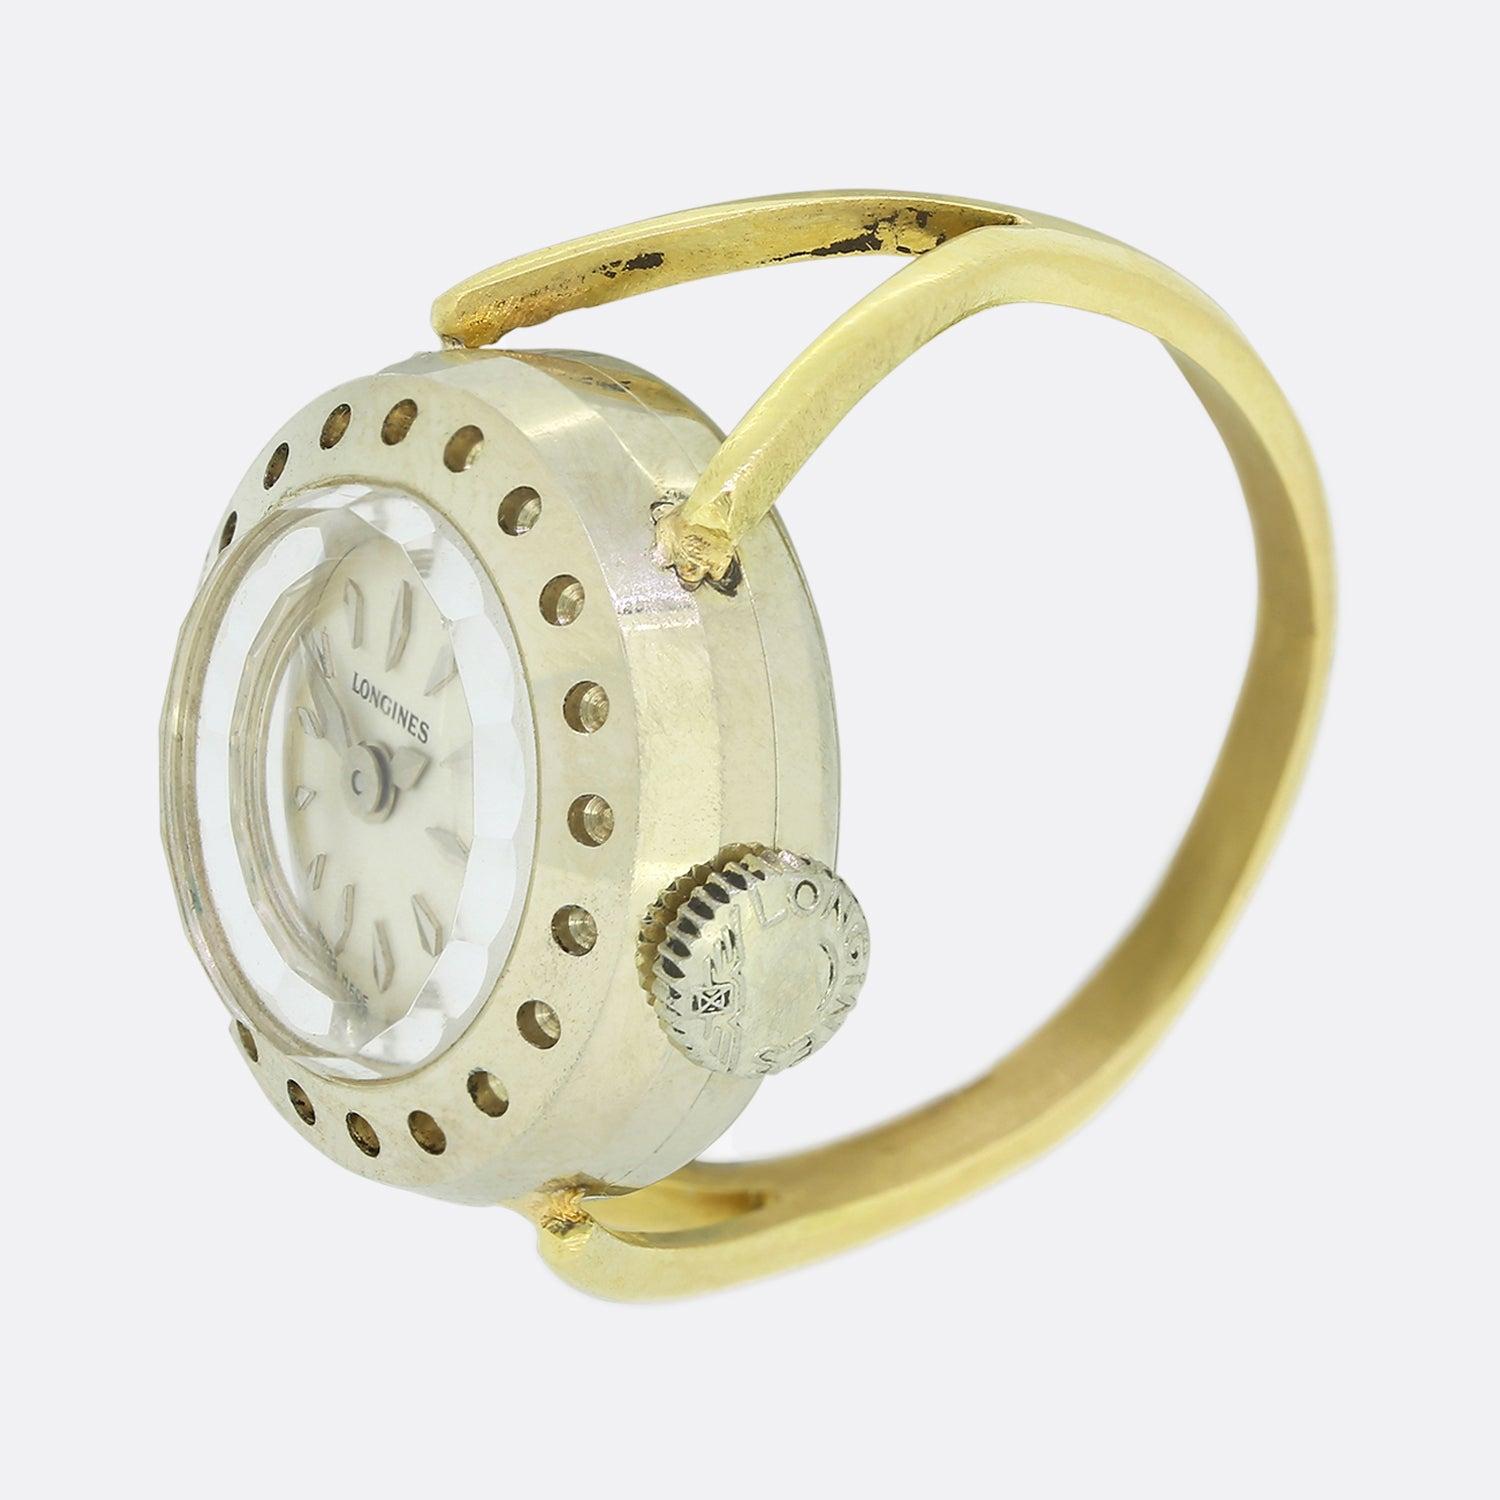 This is a wonderful Vintage Longines watch ring. It features a circular face with a silver dial, silver hour markers and silver hands. The watch has all its original parts including the dial, crown and hands. It has a steel case and an 18ct gold